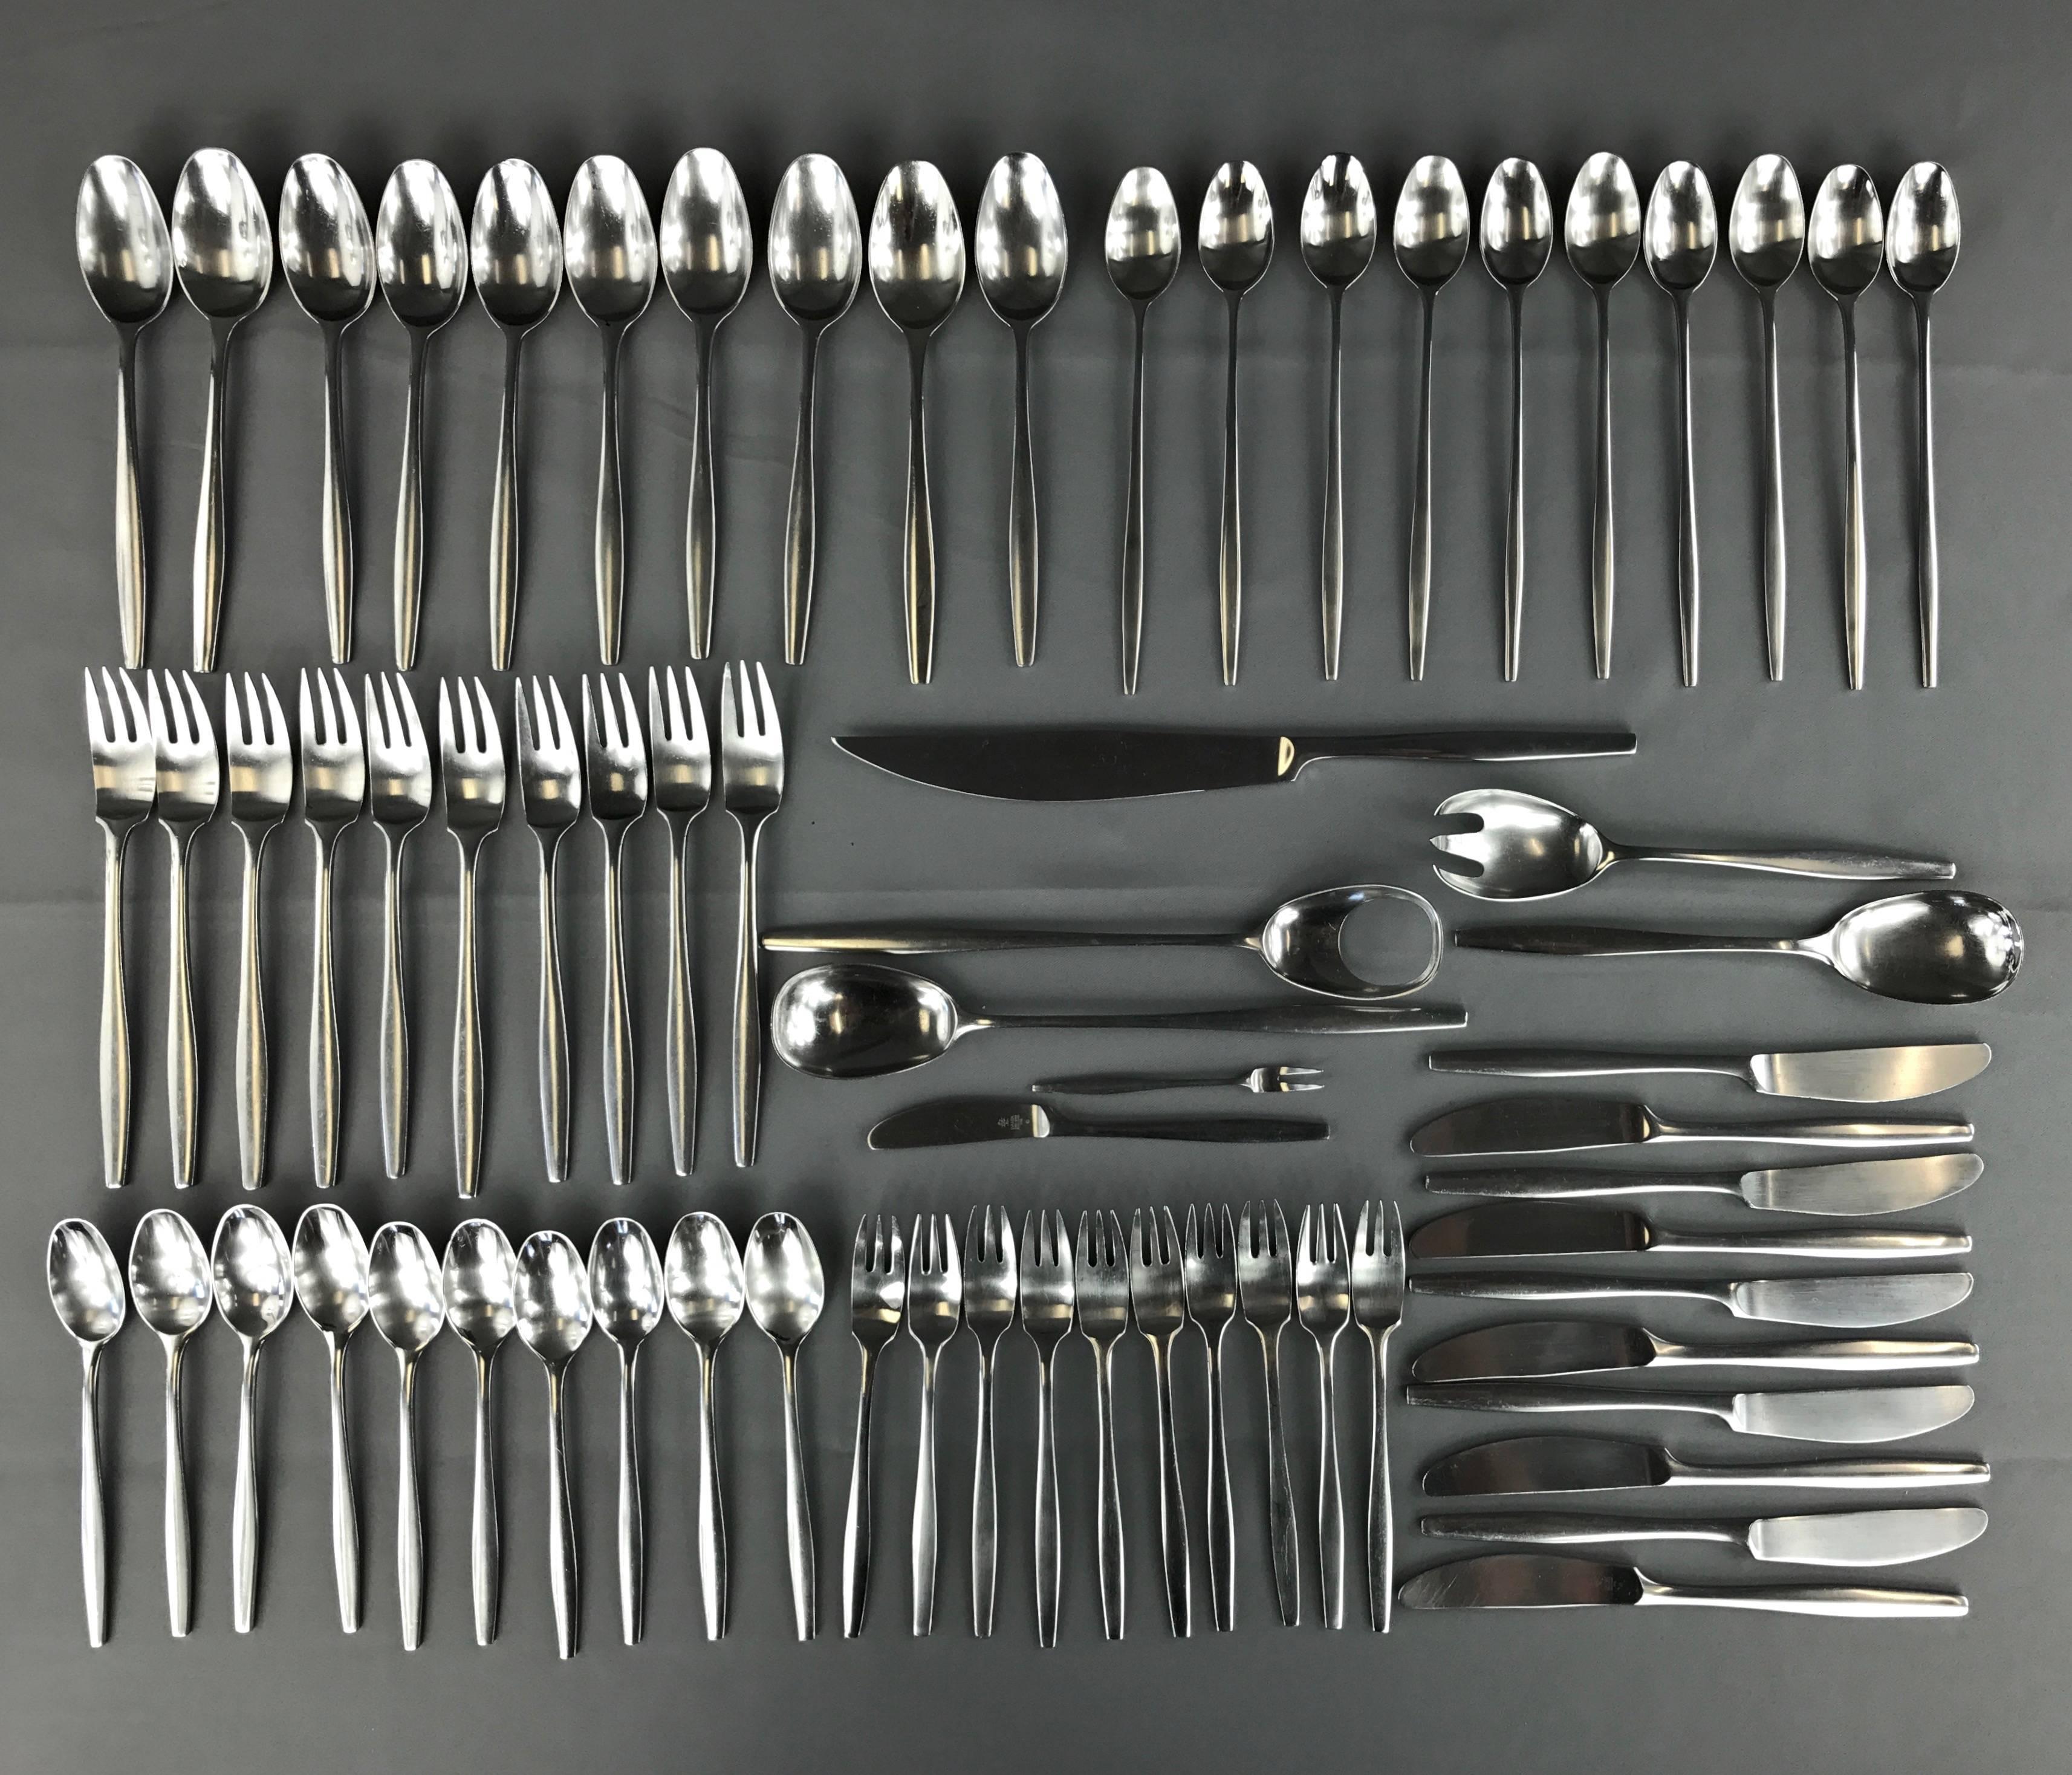 A vintage “Variation V” 67-piece stainless steel flatware service for ten designed by Jens Quistgaard for Dansk Designs in 1957.

Set comprised of ten six-piece dinner settings with five assorted serving pieces. Perfectly balanced, with a slender